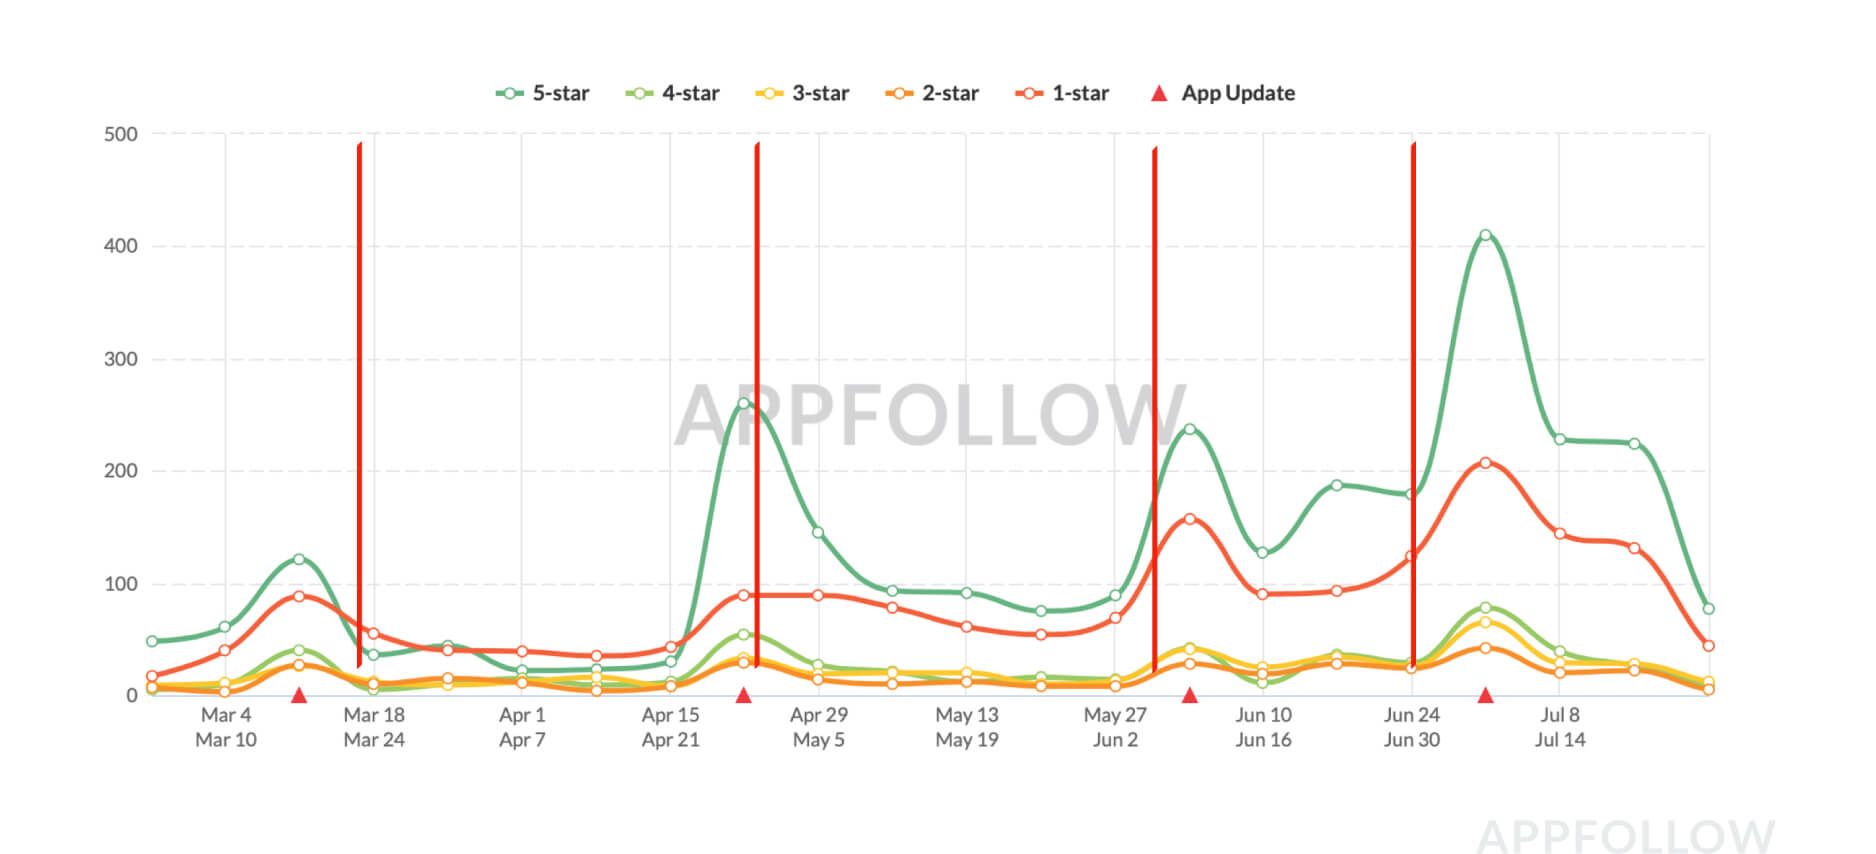 After the July 4th release, the number of negative reviews saw a significant spike. By looking at these reviews and fixing remaining errors, you can bring negative reviews to a minimum. Source: appfollow.io